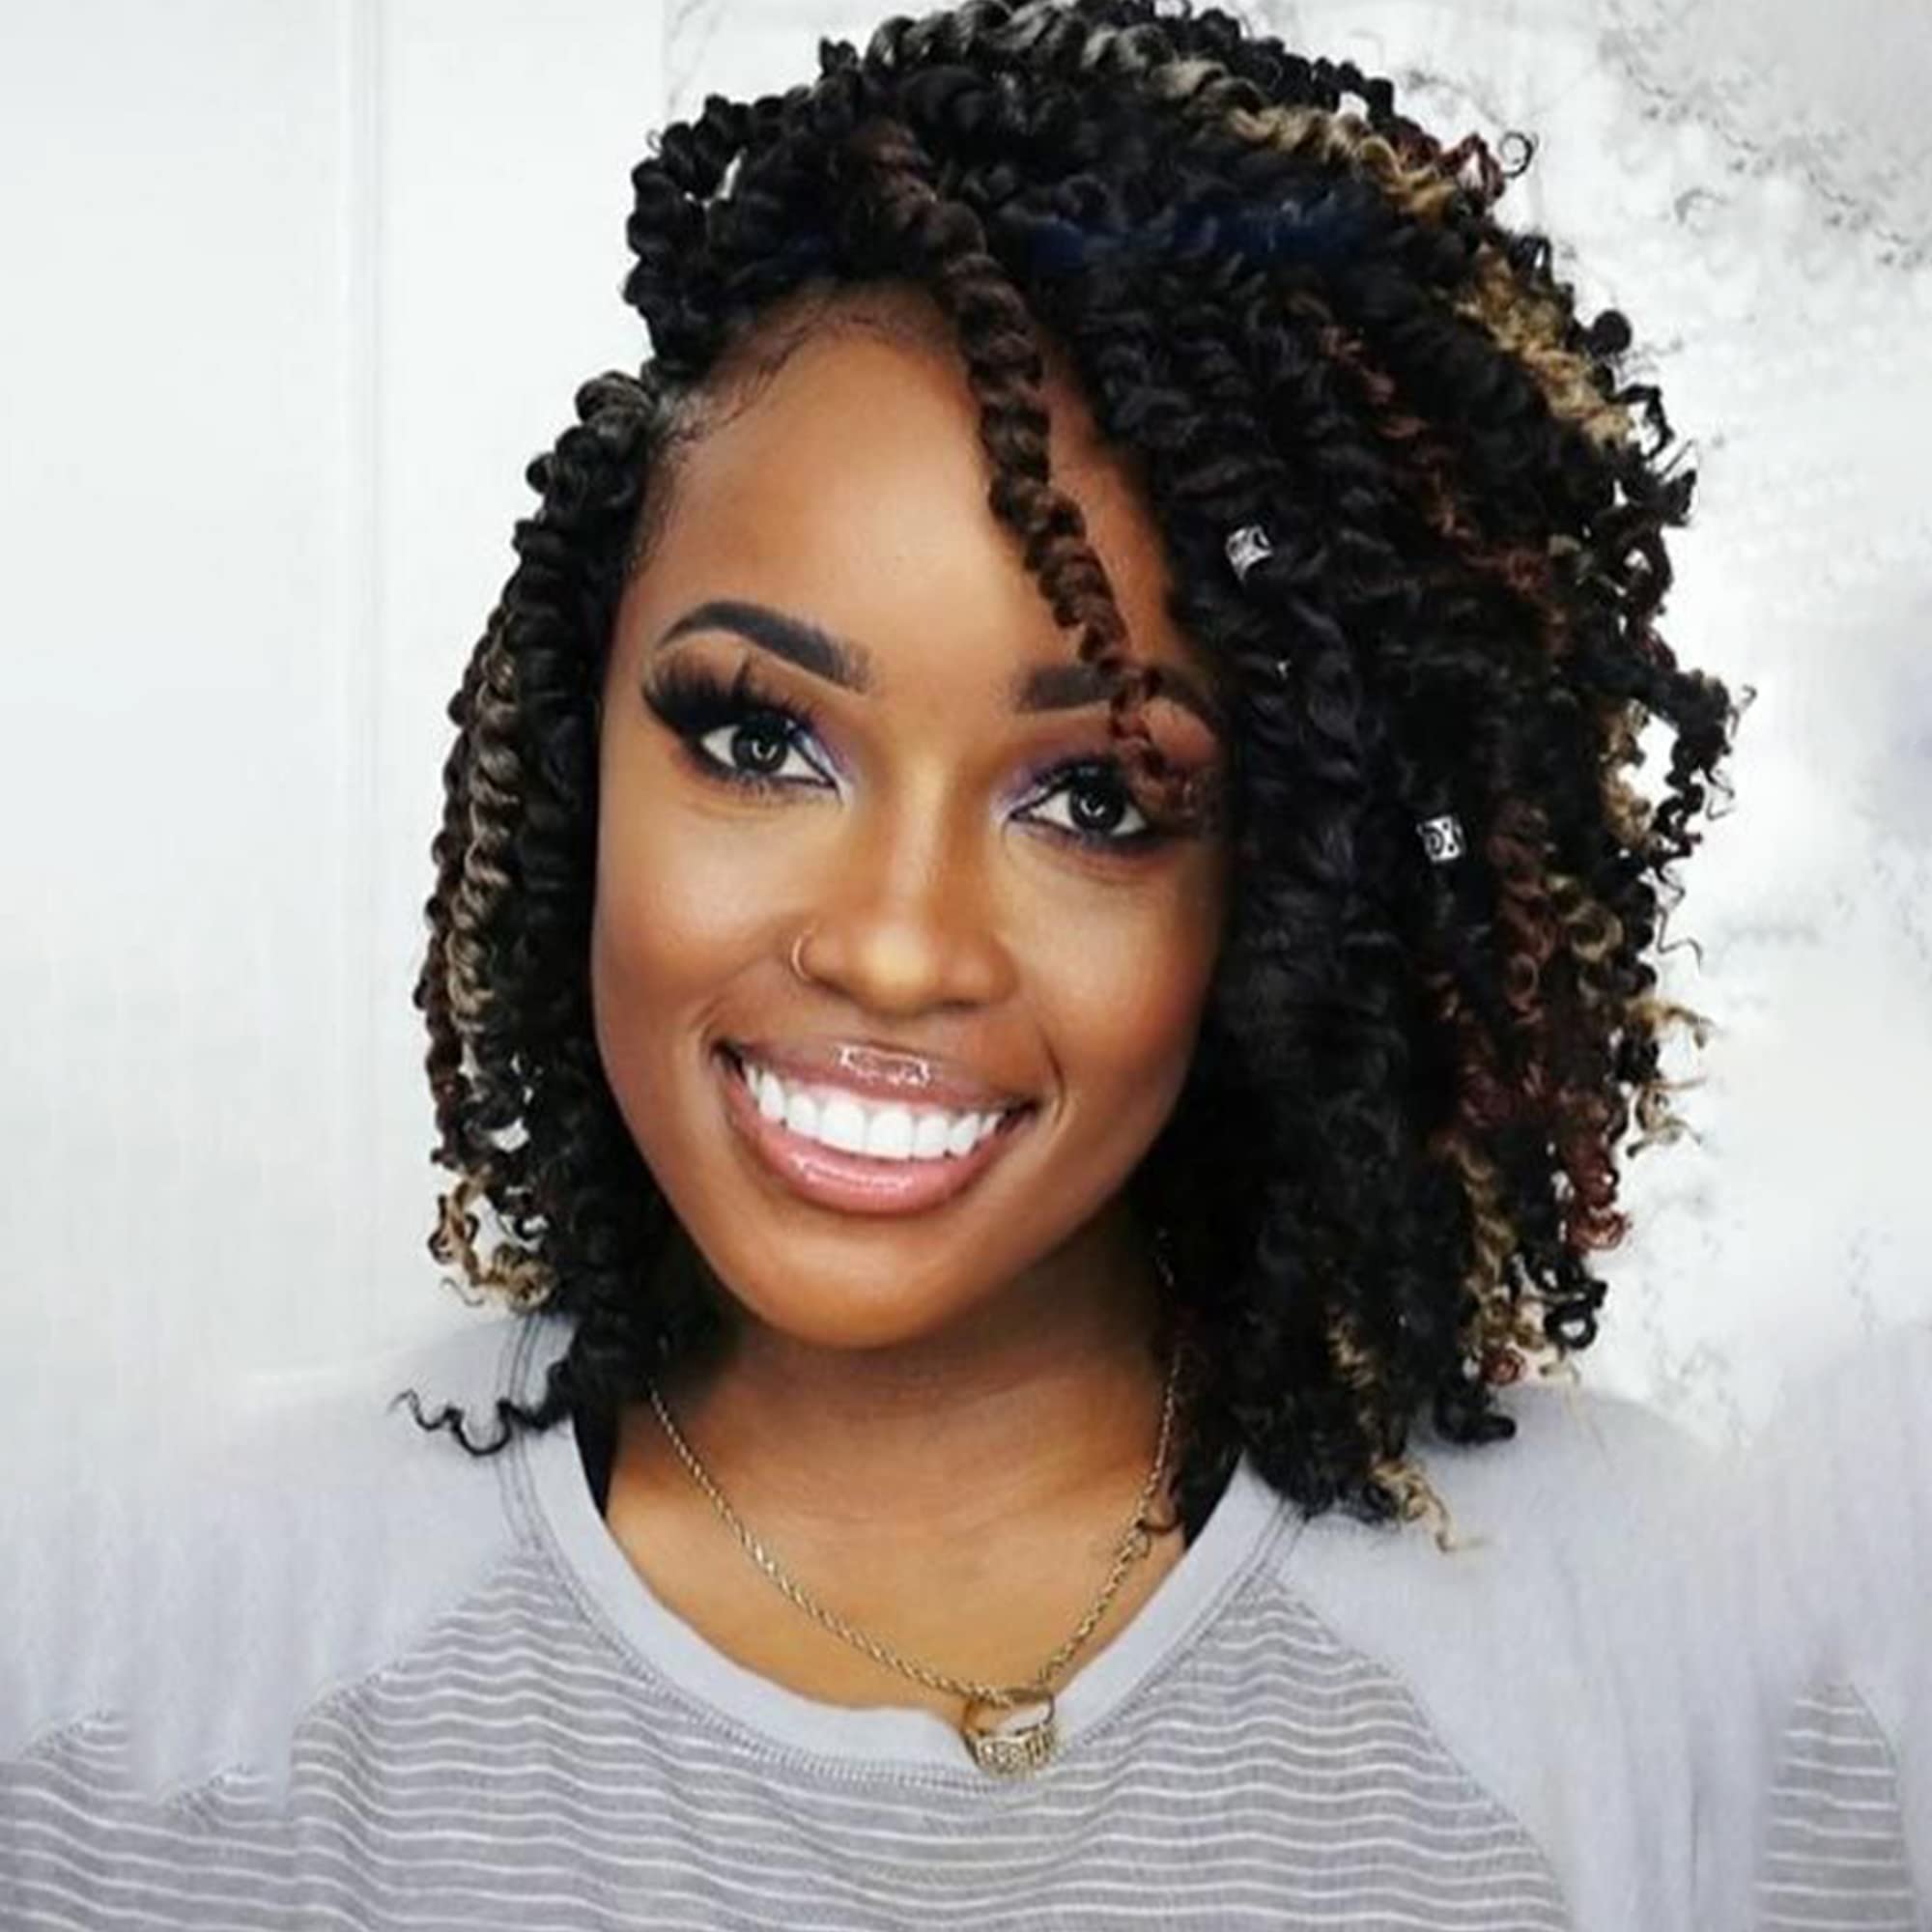 Pre-twisted Passion Twist Hair 8 Inch Passion Twist Crochet Hair Pre-looped  Water Wave Crochet Braids Hair for Black Women Bohemian Passion Twist  Braids Synthetic Hair Extensions (8packs